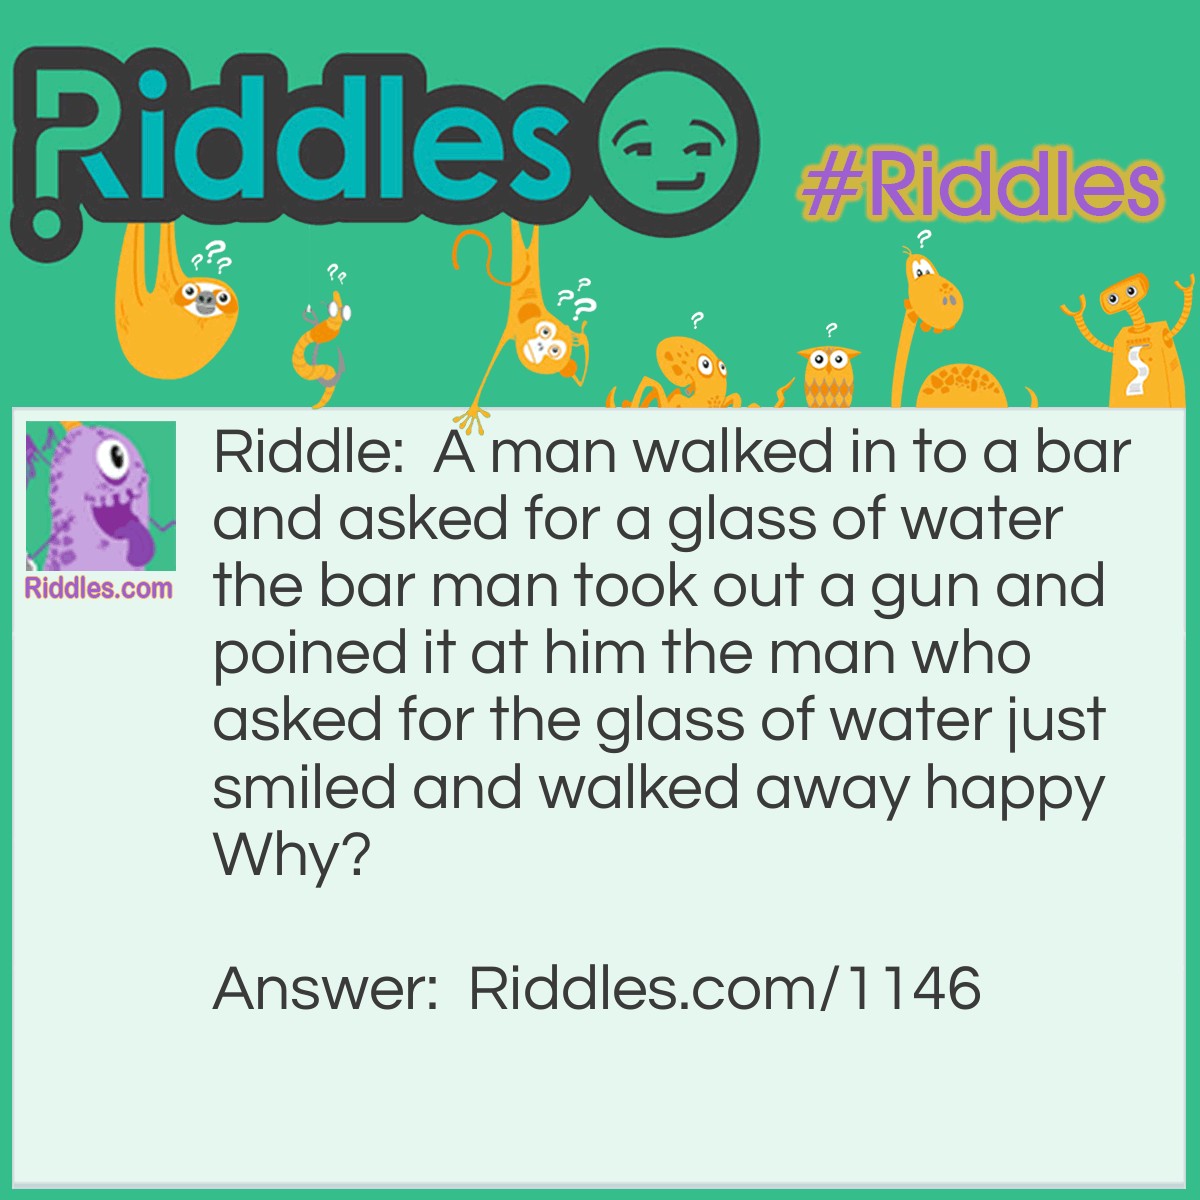 Riddle: A man walked in to a bar and asked for a glass of water the bar man took out a gun and poined it at him the man who asked for the glass of water just smiled and walked away happy Why? Answer: He had the hicupps